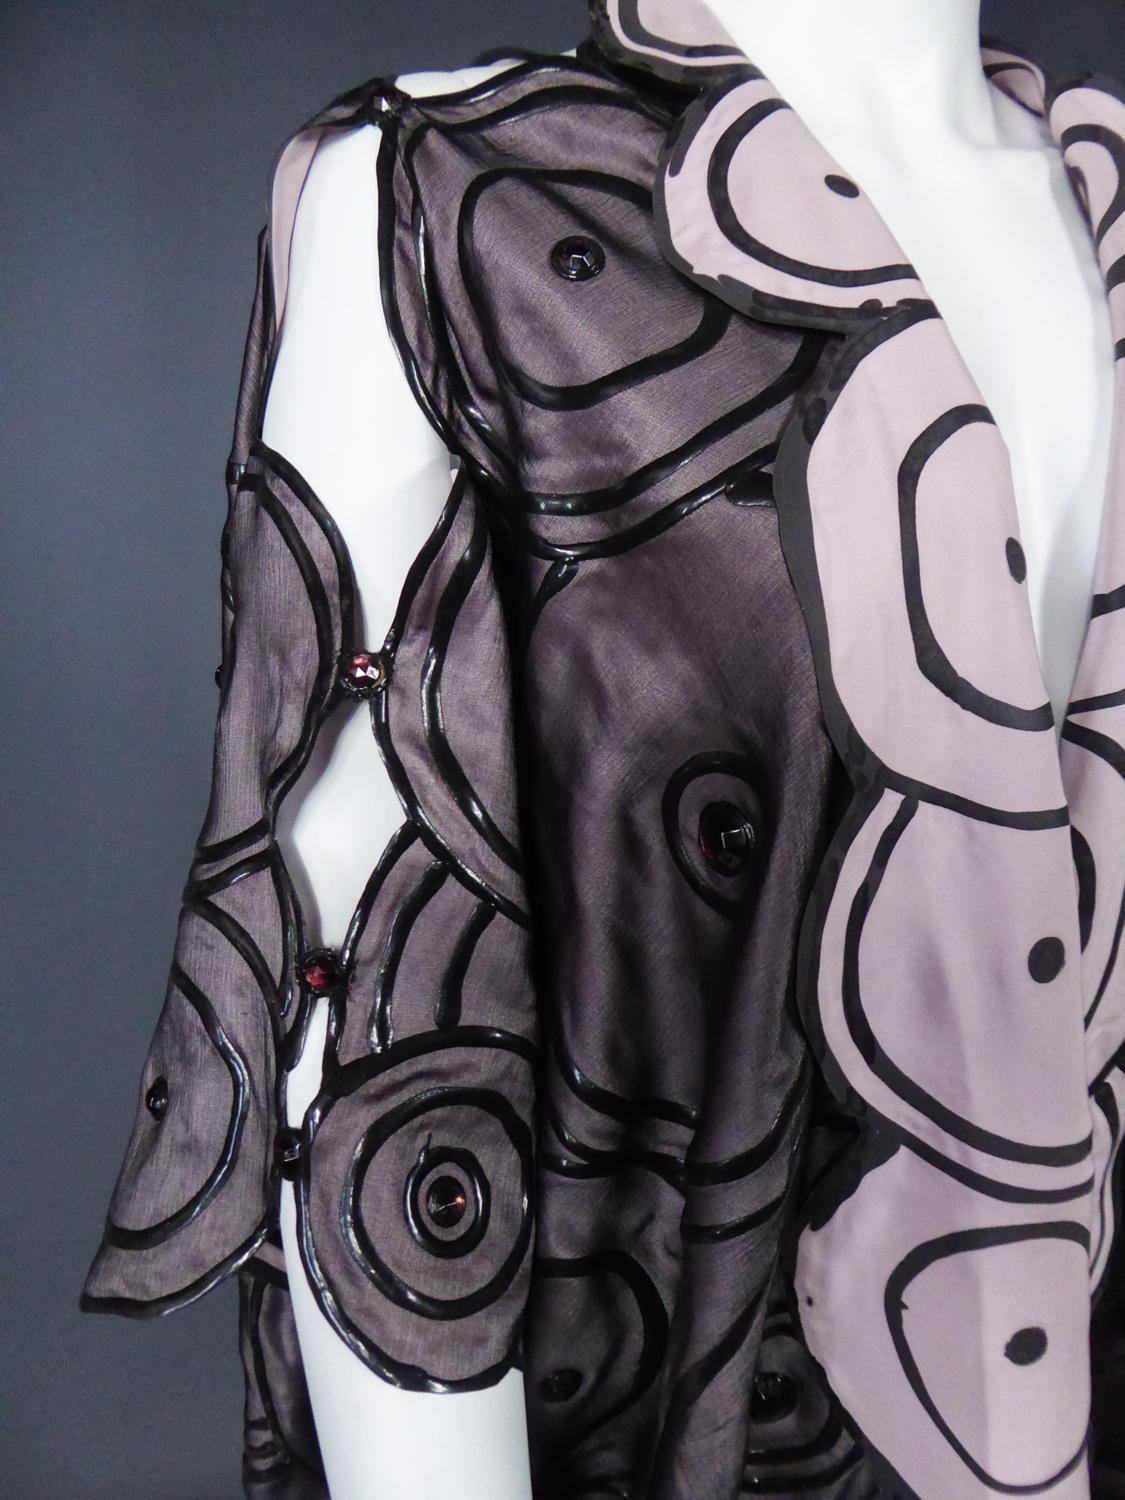 Circa 1985/1990
England

Kaftan or evening kimono in rubber-painted silk by Ian & Marcel, creator of a London avant-garde brand from the end of the 1980s. Kaftan cut with wide slashed sleeves on the arms and shoulders. Totally innovative material in